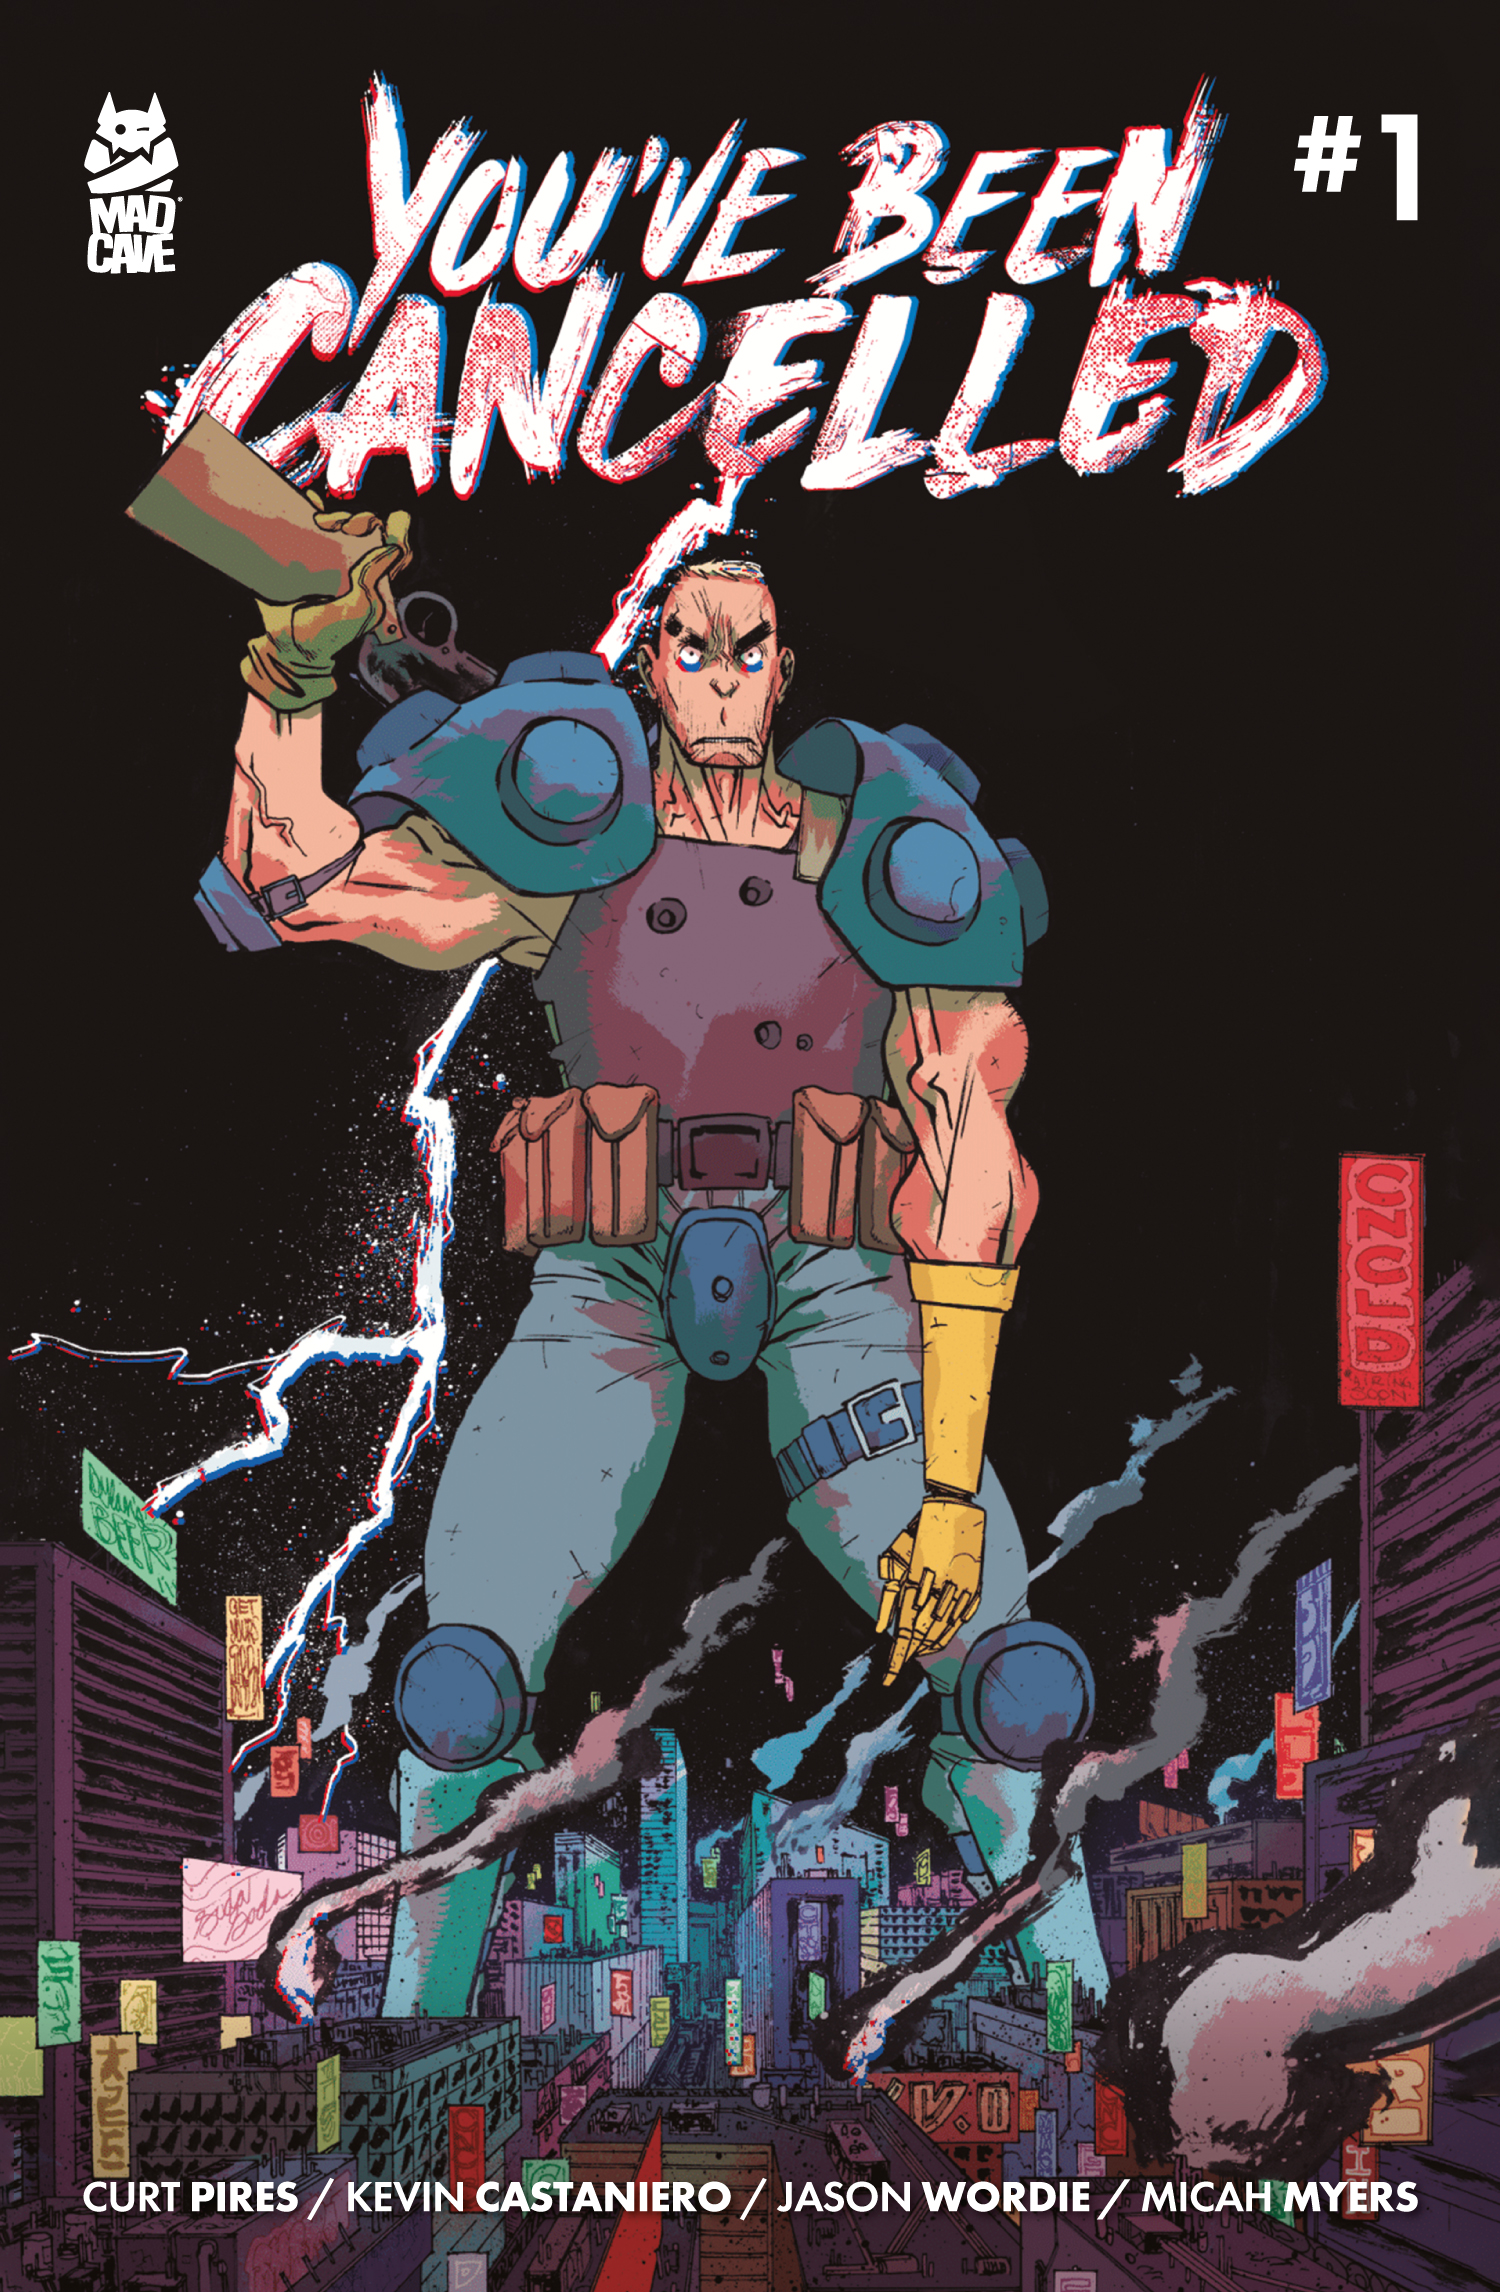 You've Been Cancelled #1 Cover A Kevin Castaneiro & Jason Wordie (Of 4)